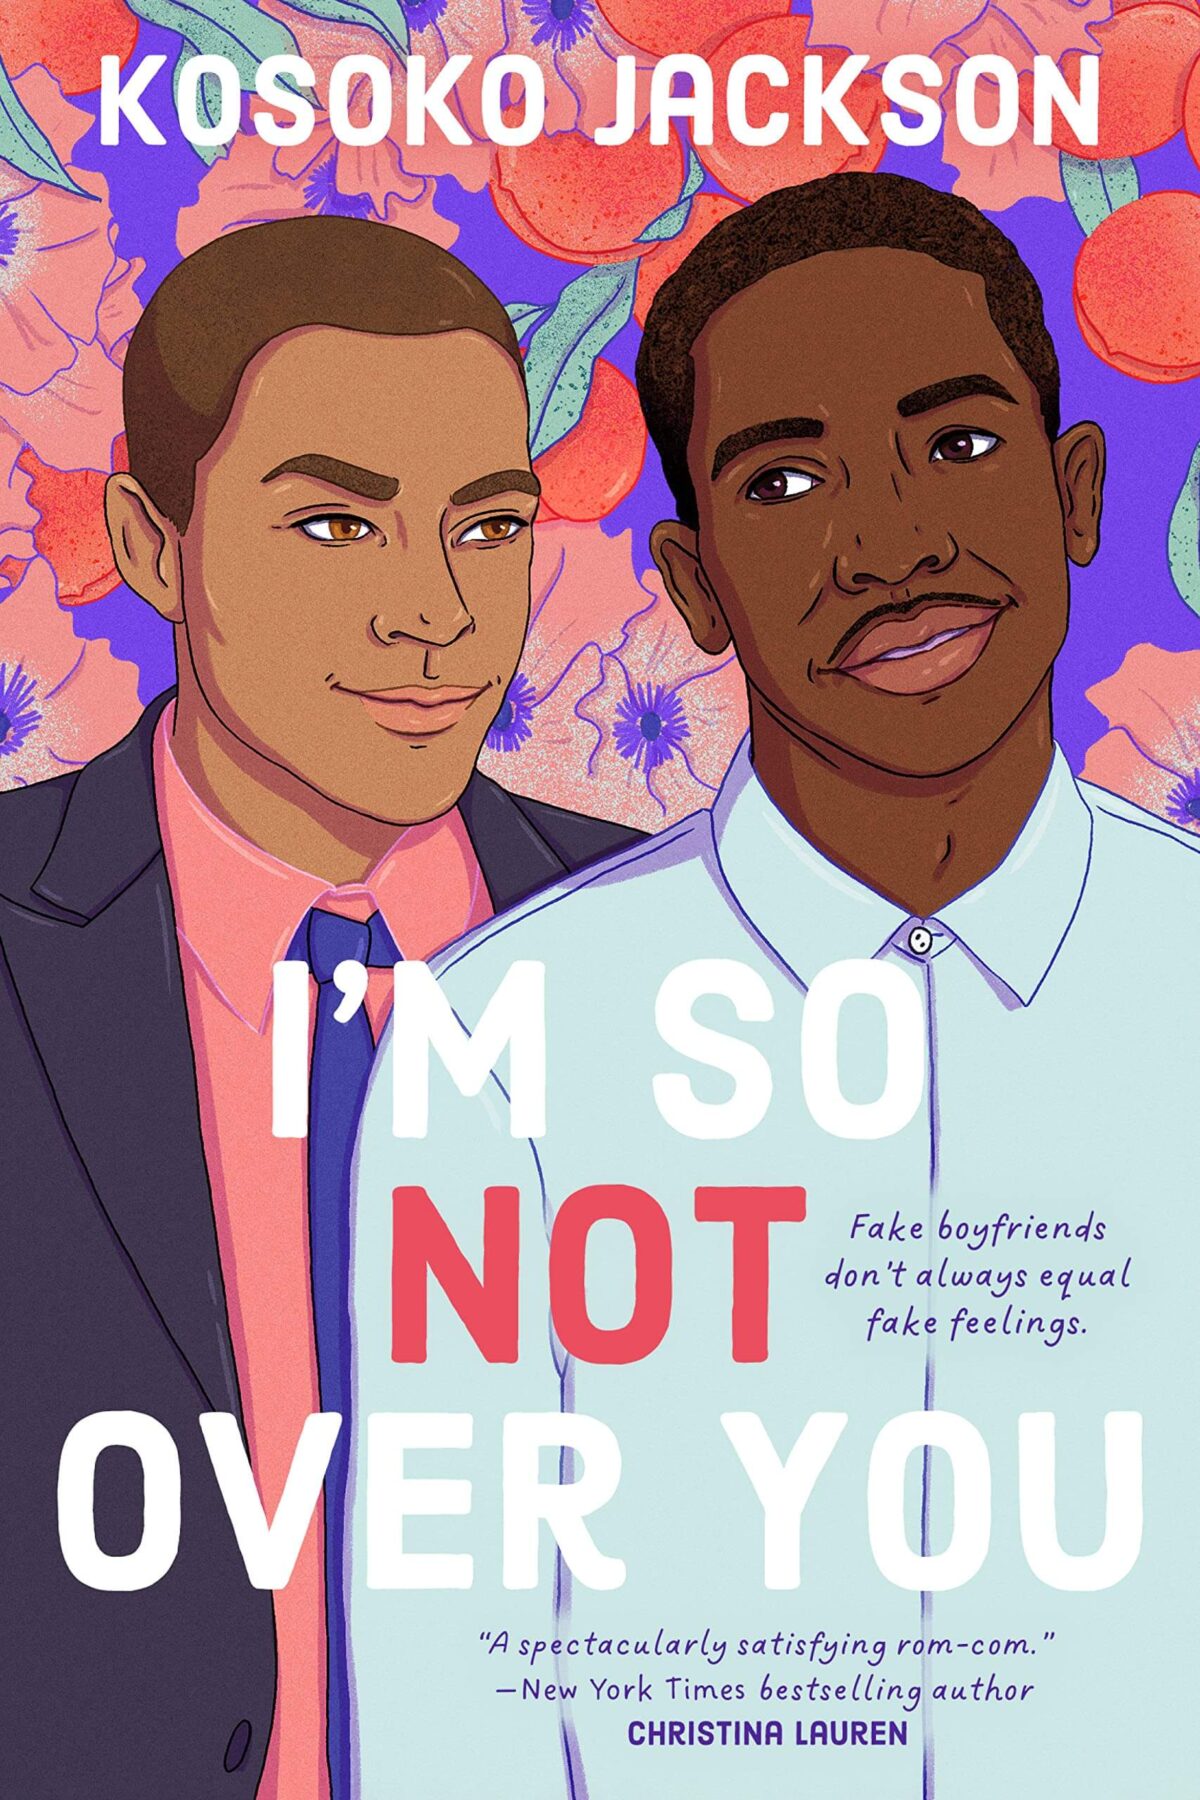 A bright pink and purple floral background with two black men side eyeing each other on the cover.